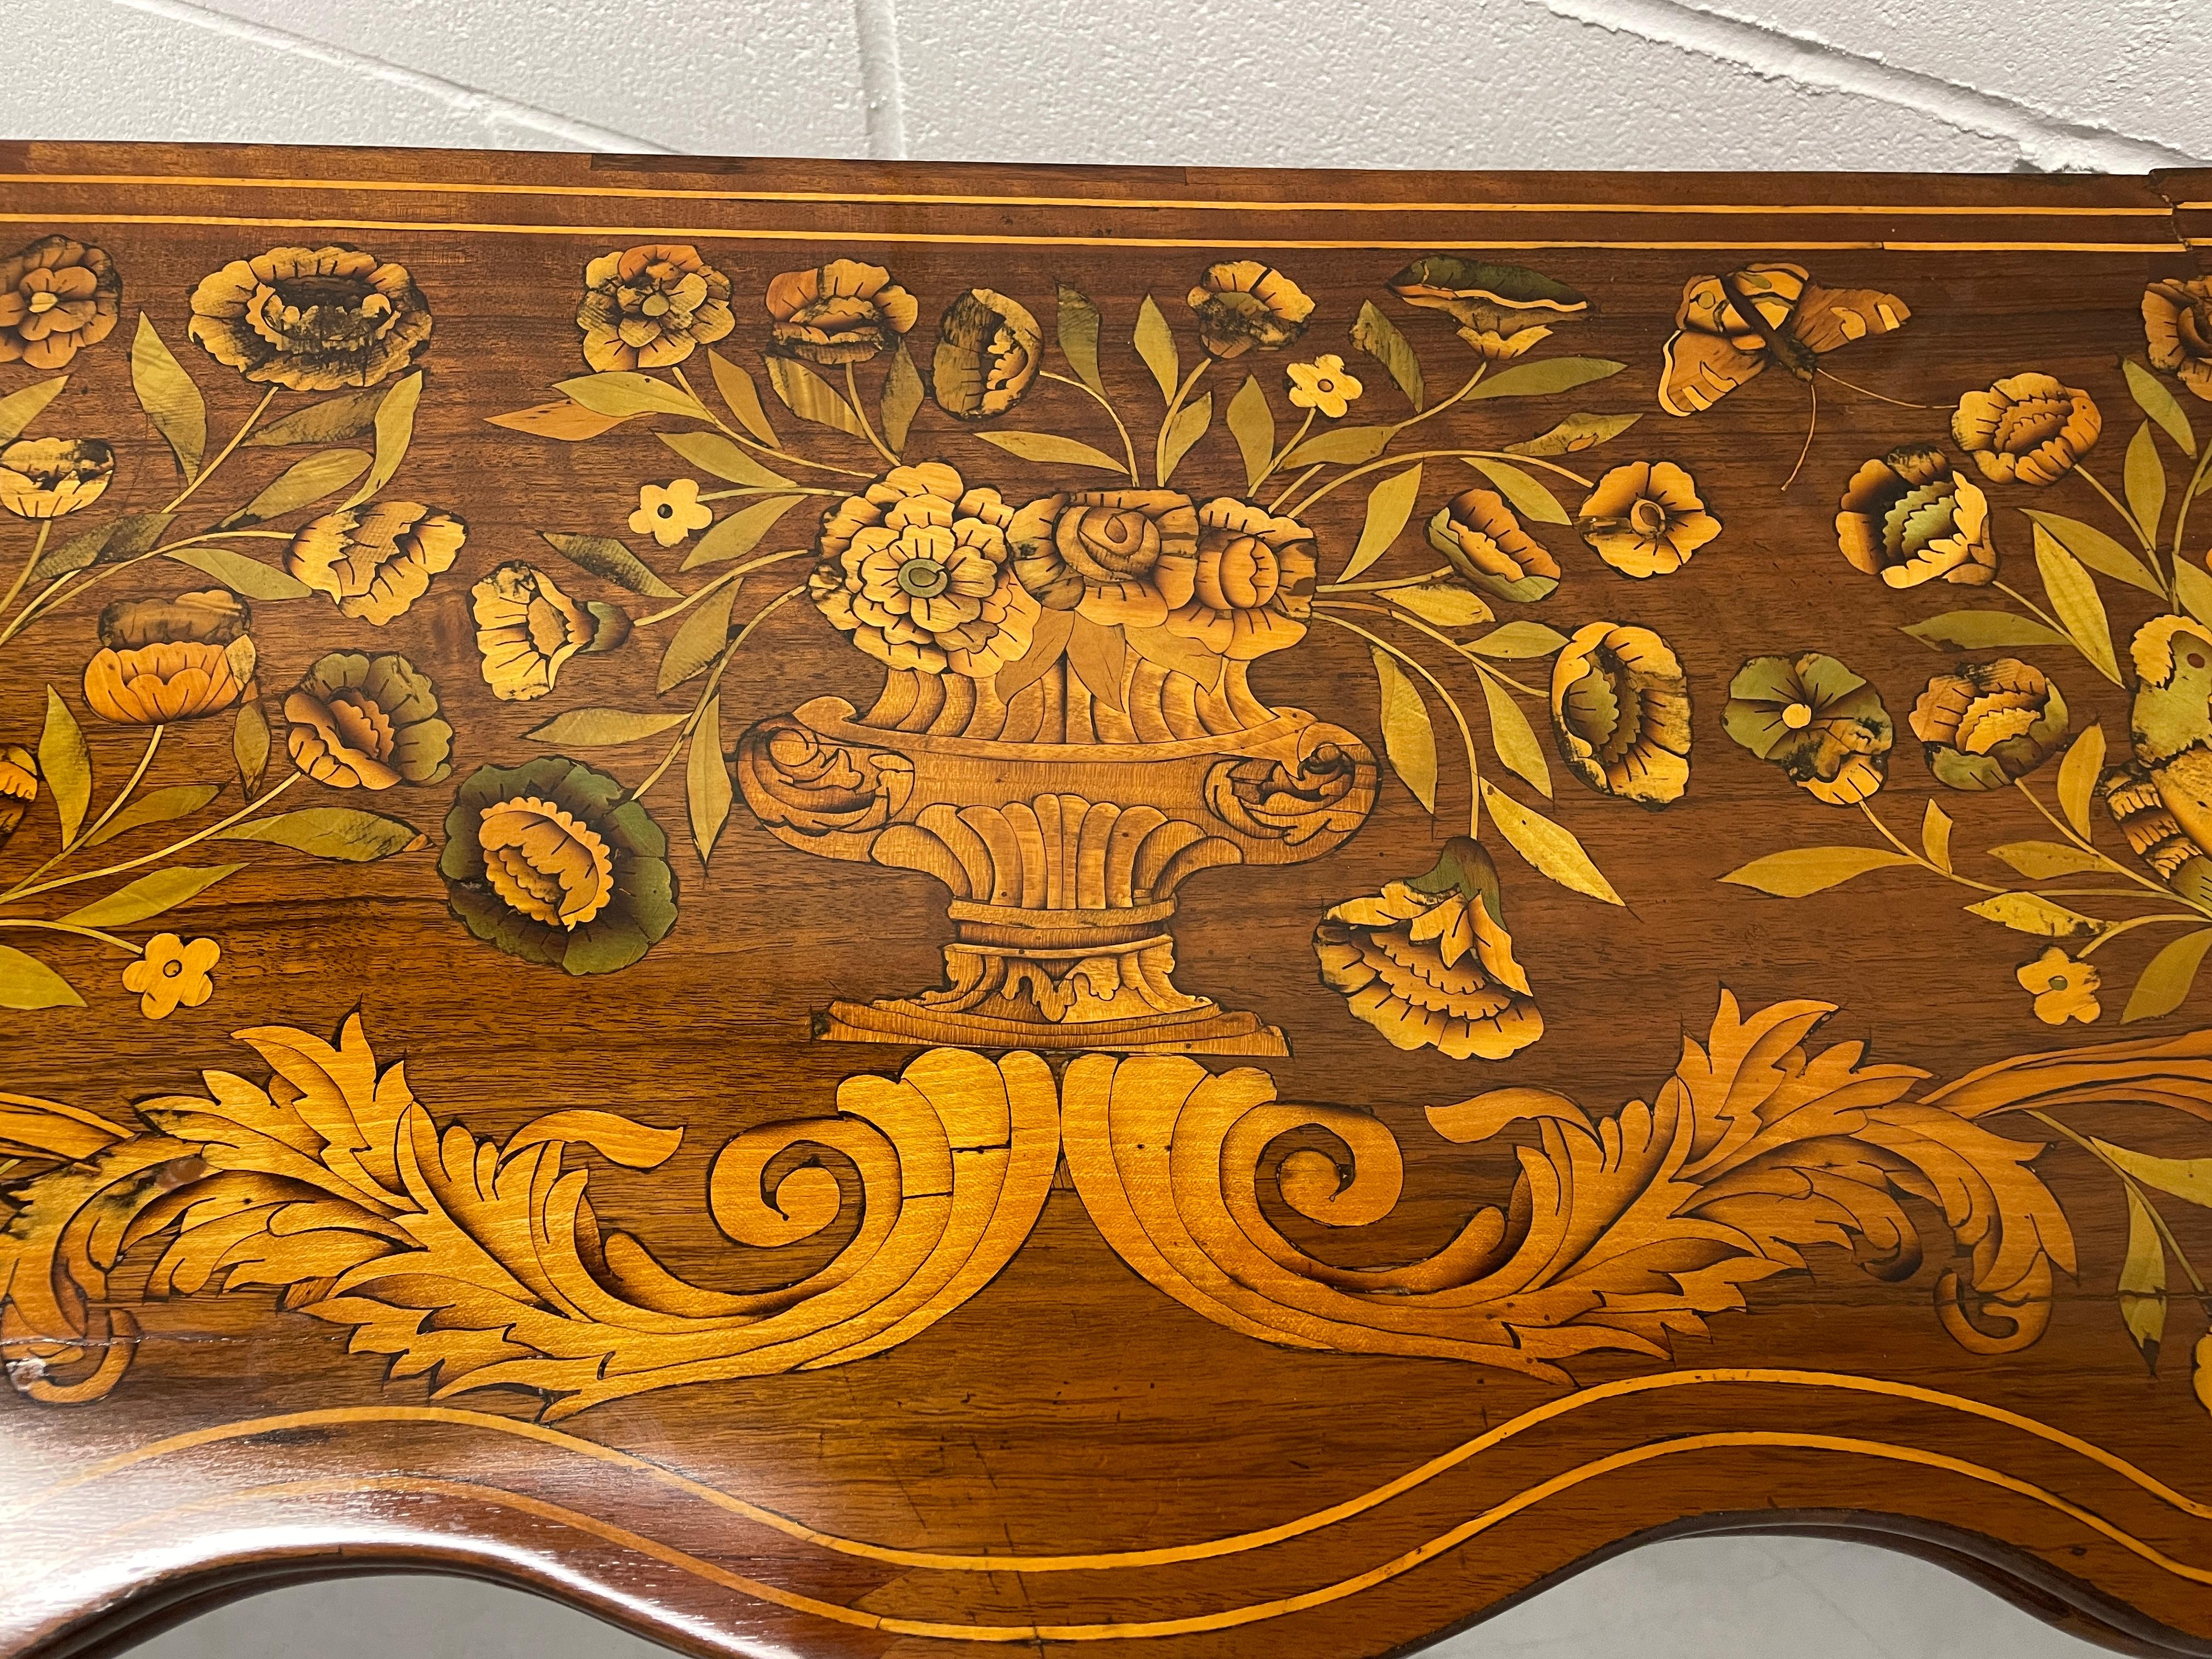 This unique card table dates back to the second half of the 18th century and comes from the Netherlands. The card table has a gorgeous marquetry on the top. Flowers and birds decorate this exquisite piece. You can easily use it as a console table in